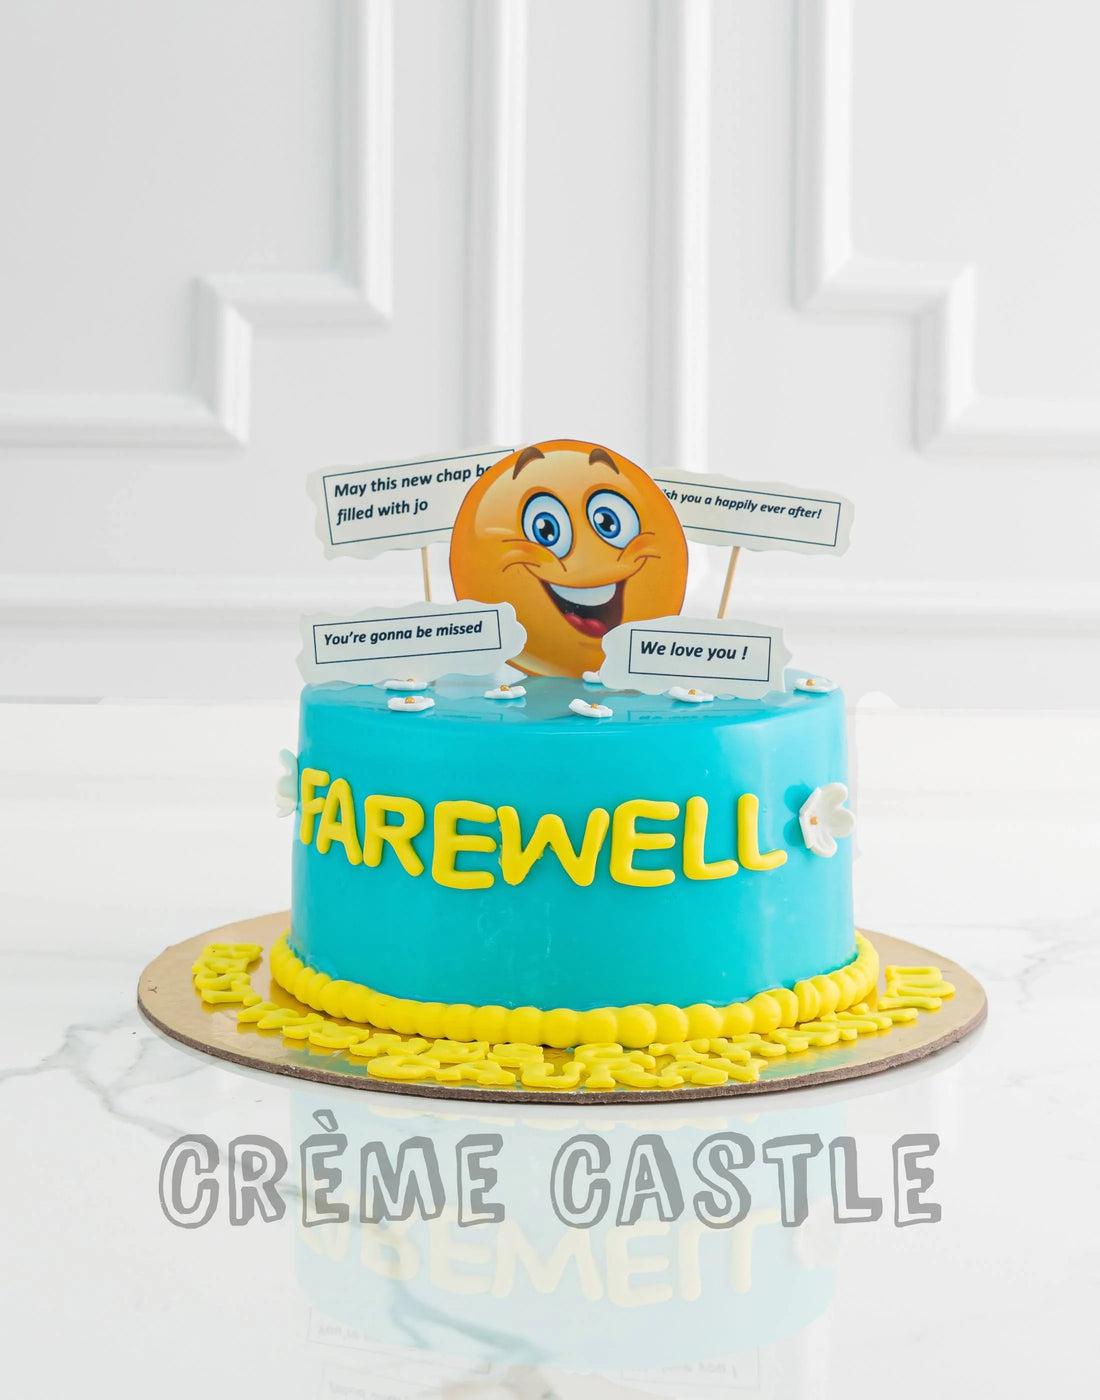 Farewell Cake with Messages by Creme Castle